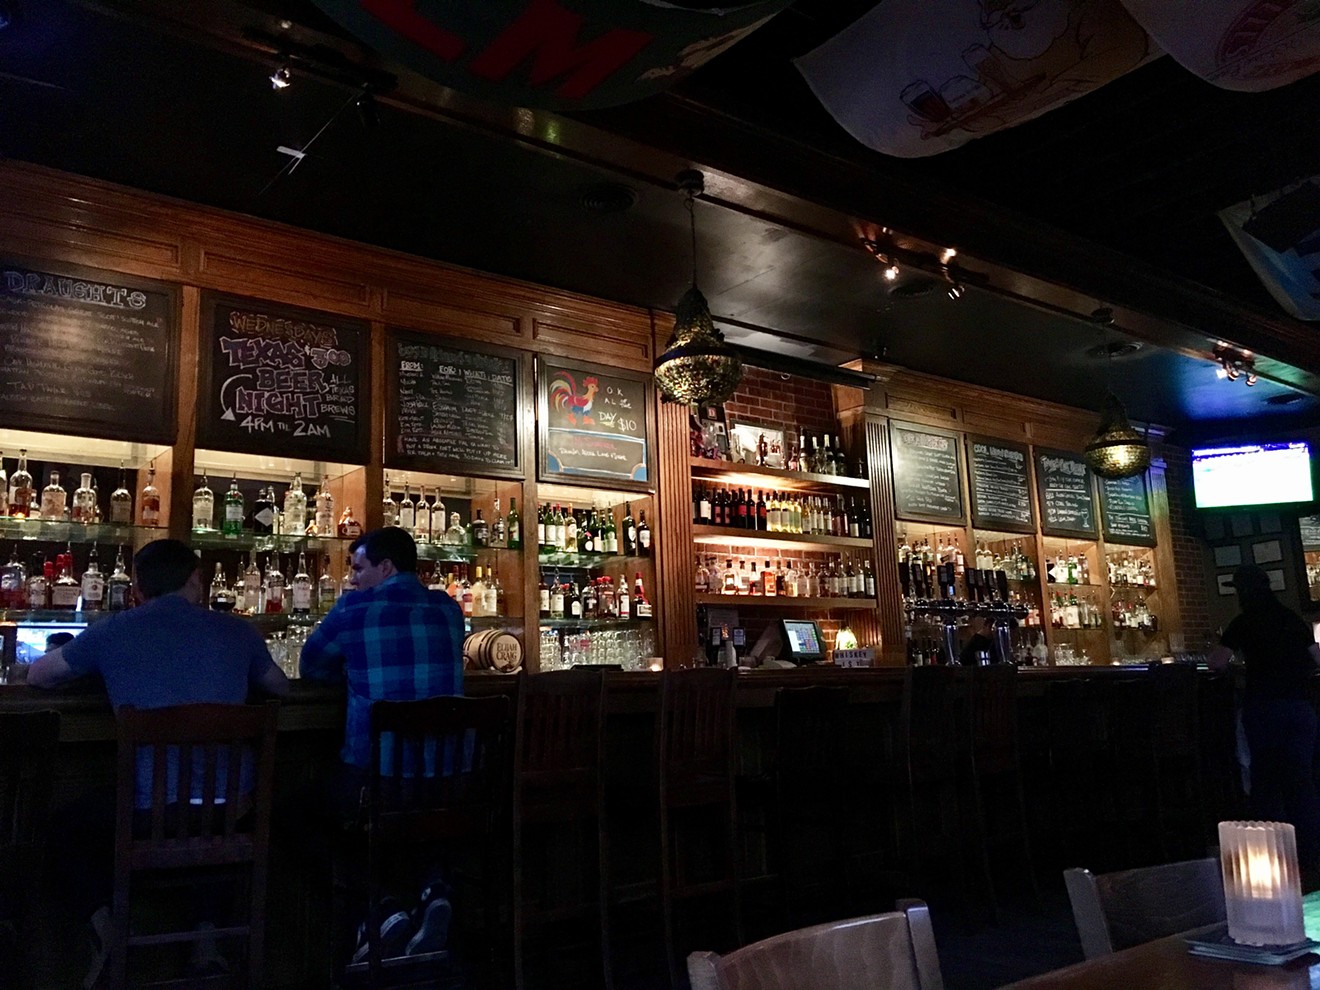 Lower Greenville's Libertine Bar is reliably posted on the corner of an ever-changing street.